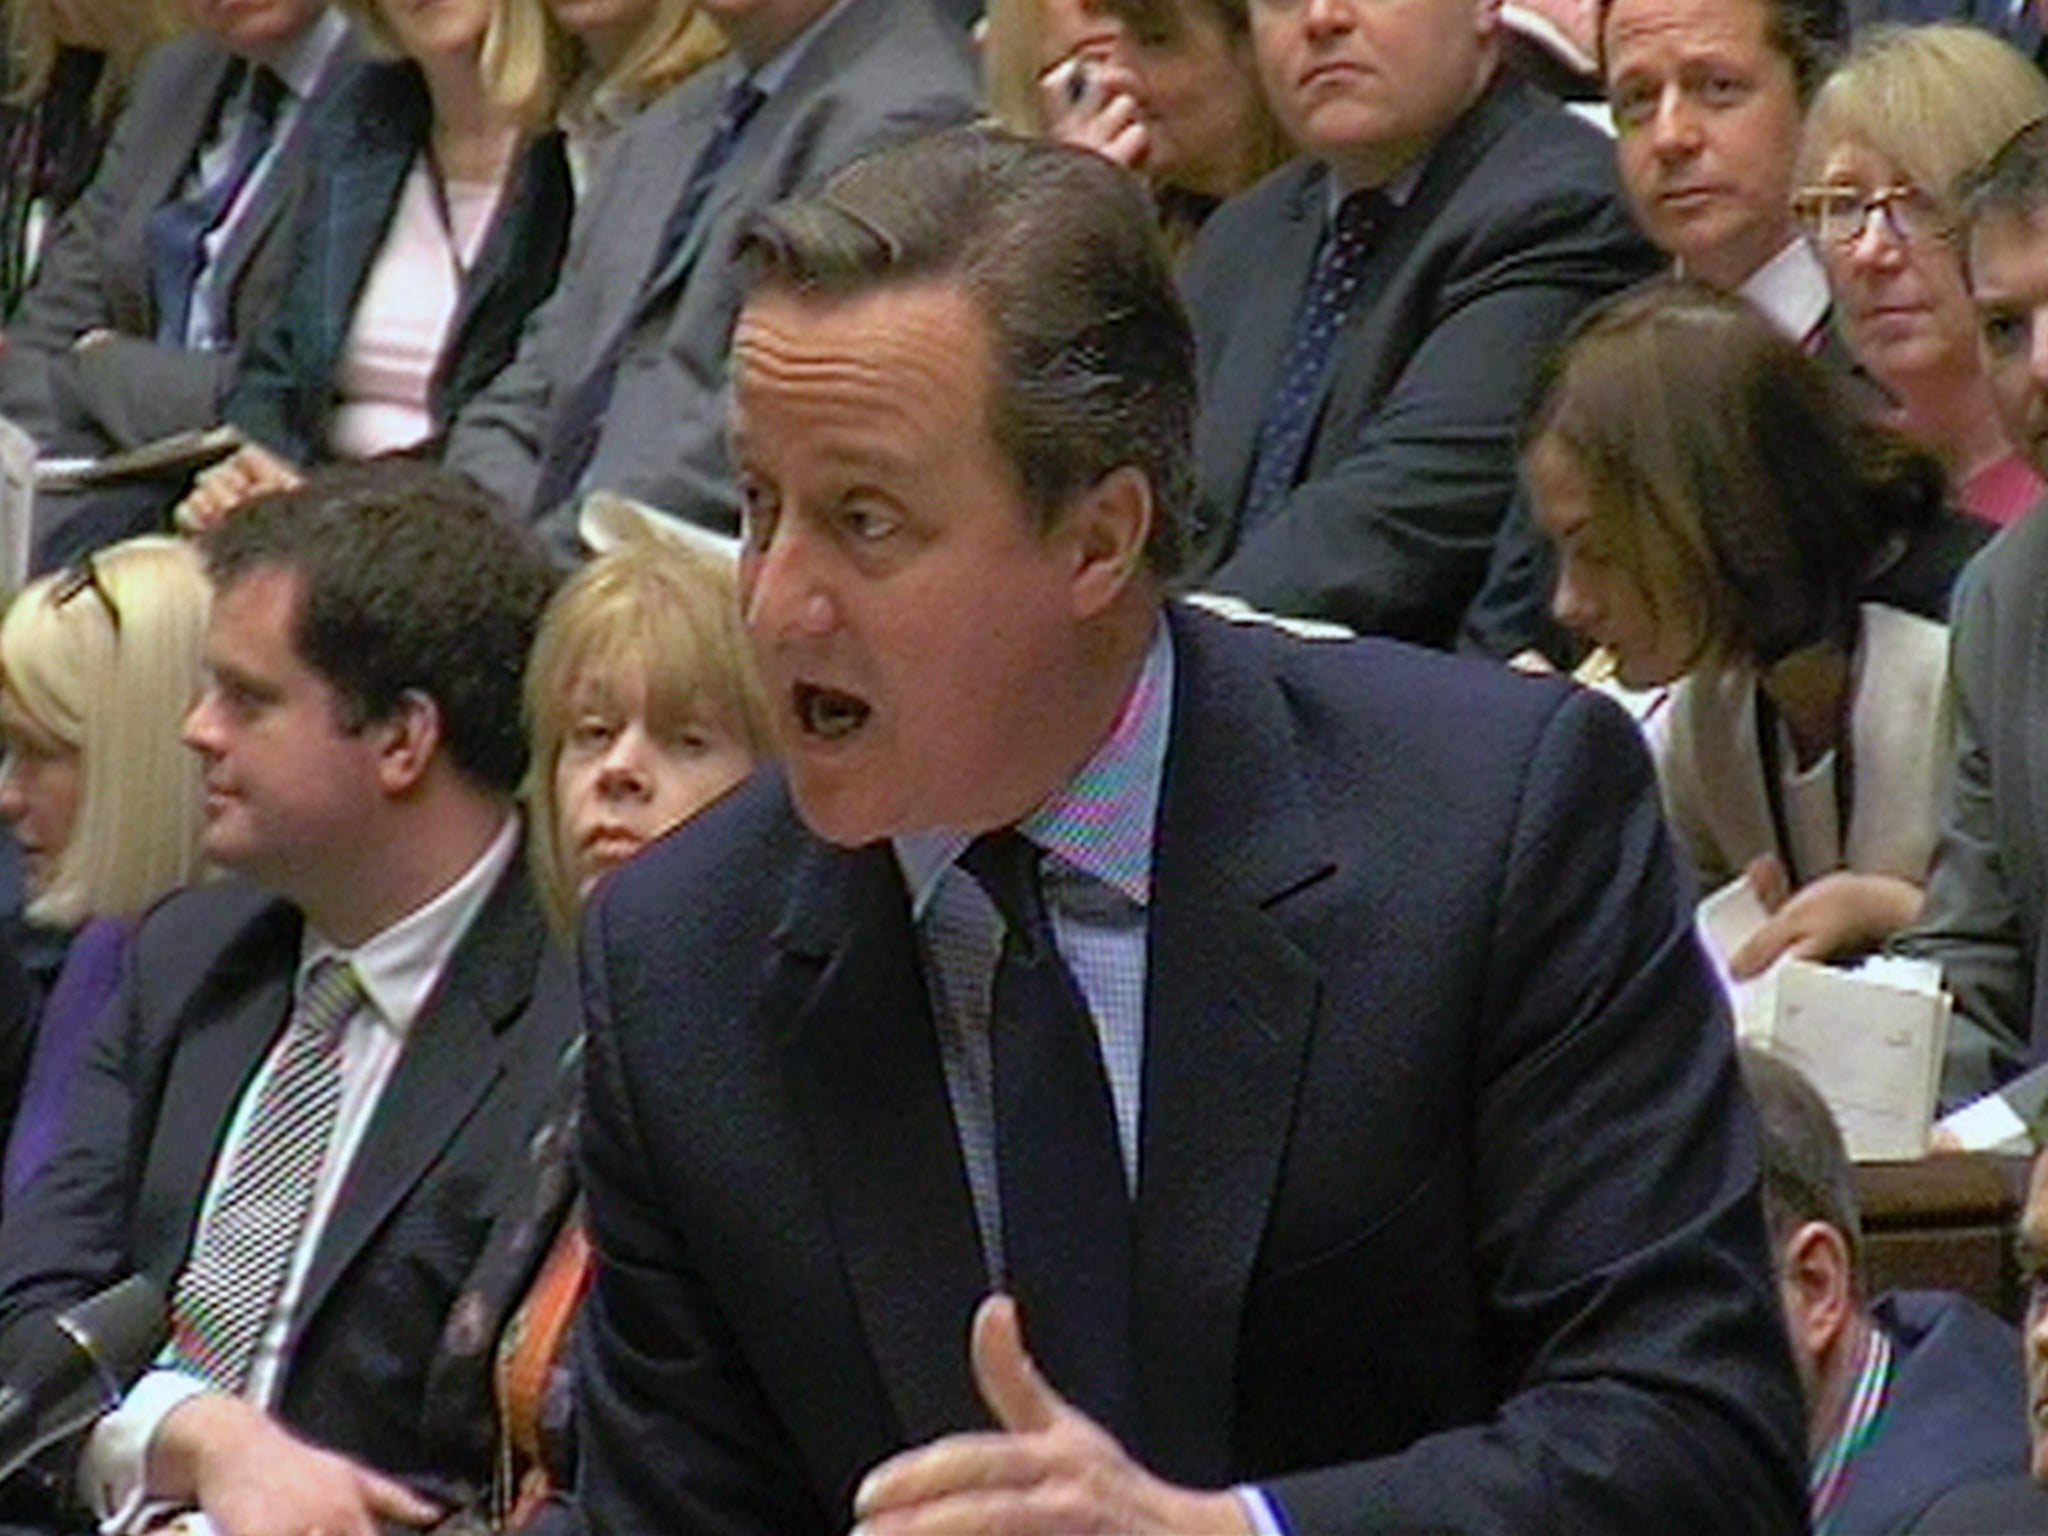 David Cameron was cornered by the Scottish National Party on the issue at PMQs